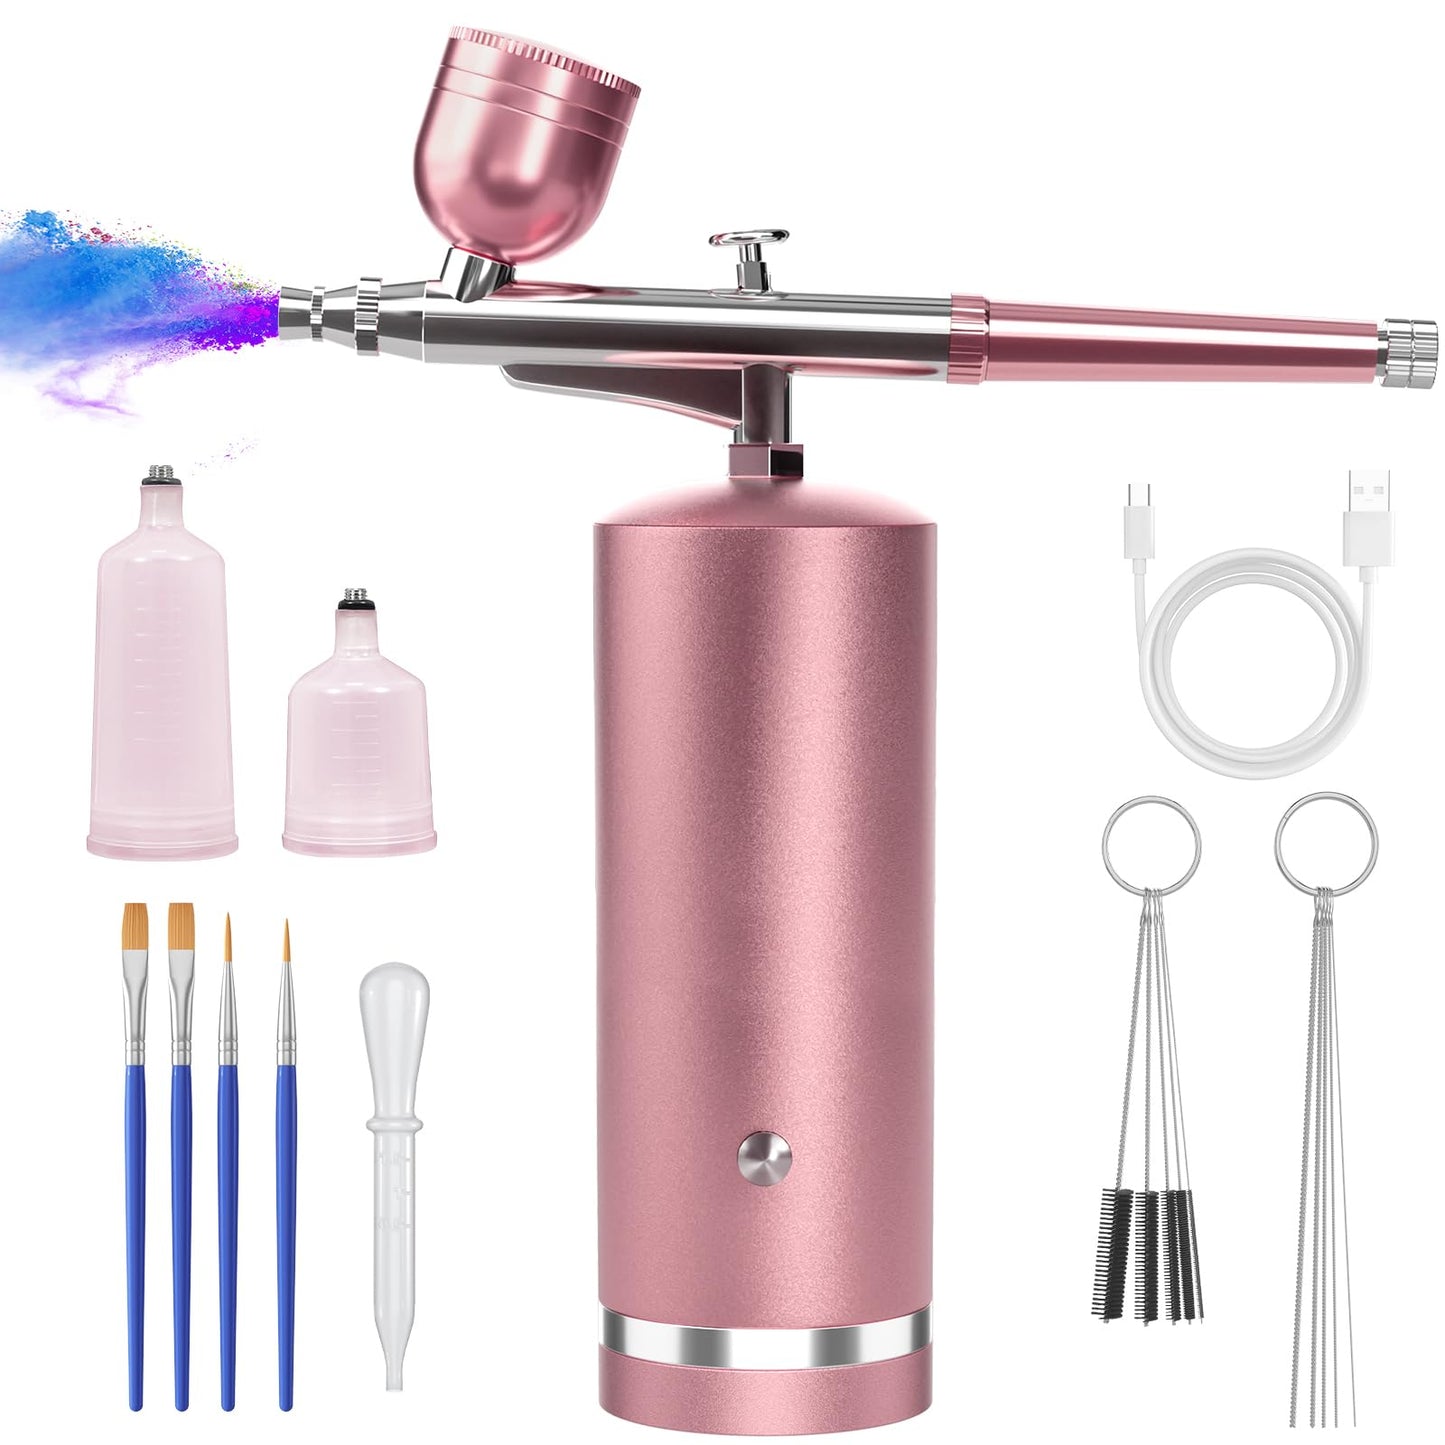 Airbrush Kit With Compressor - 48PSI Rechargeable Cordless Non-Clogging High-Pressure Air Brush Set with 0.3mm Nozzle and Cleaning Brush Set for Nail Art, Makeup, Painting, Cake Decor (Pink)